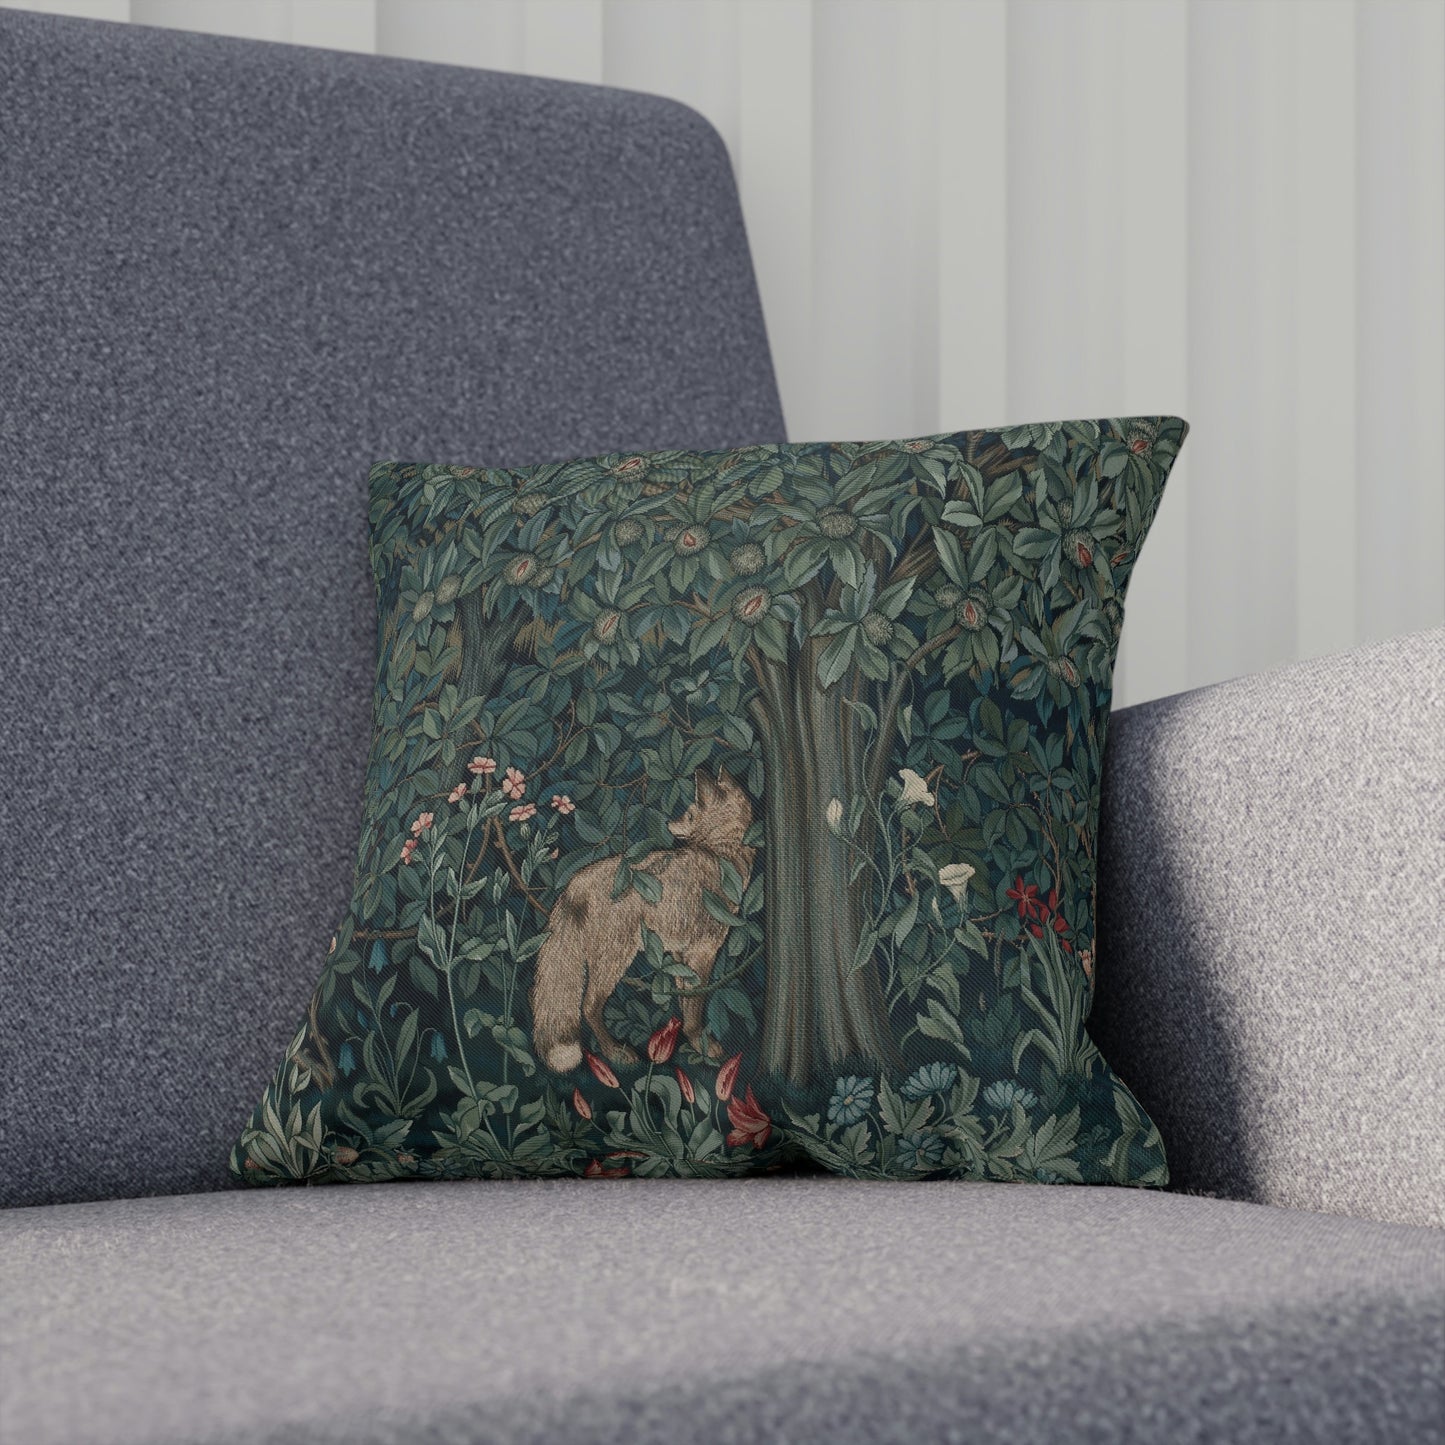 William-Morris-and-Co-Cushion-and-Cushion-Cover-Fox-by-John-Henry-Dearle-Green-Forest-Collection-5